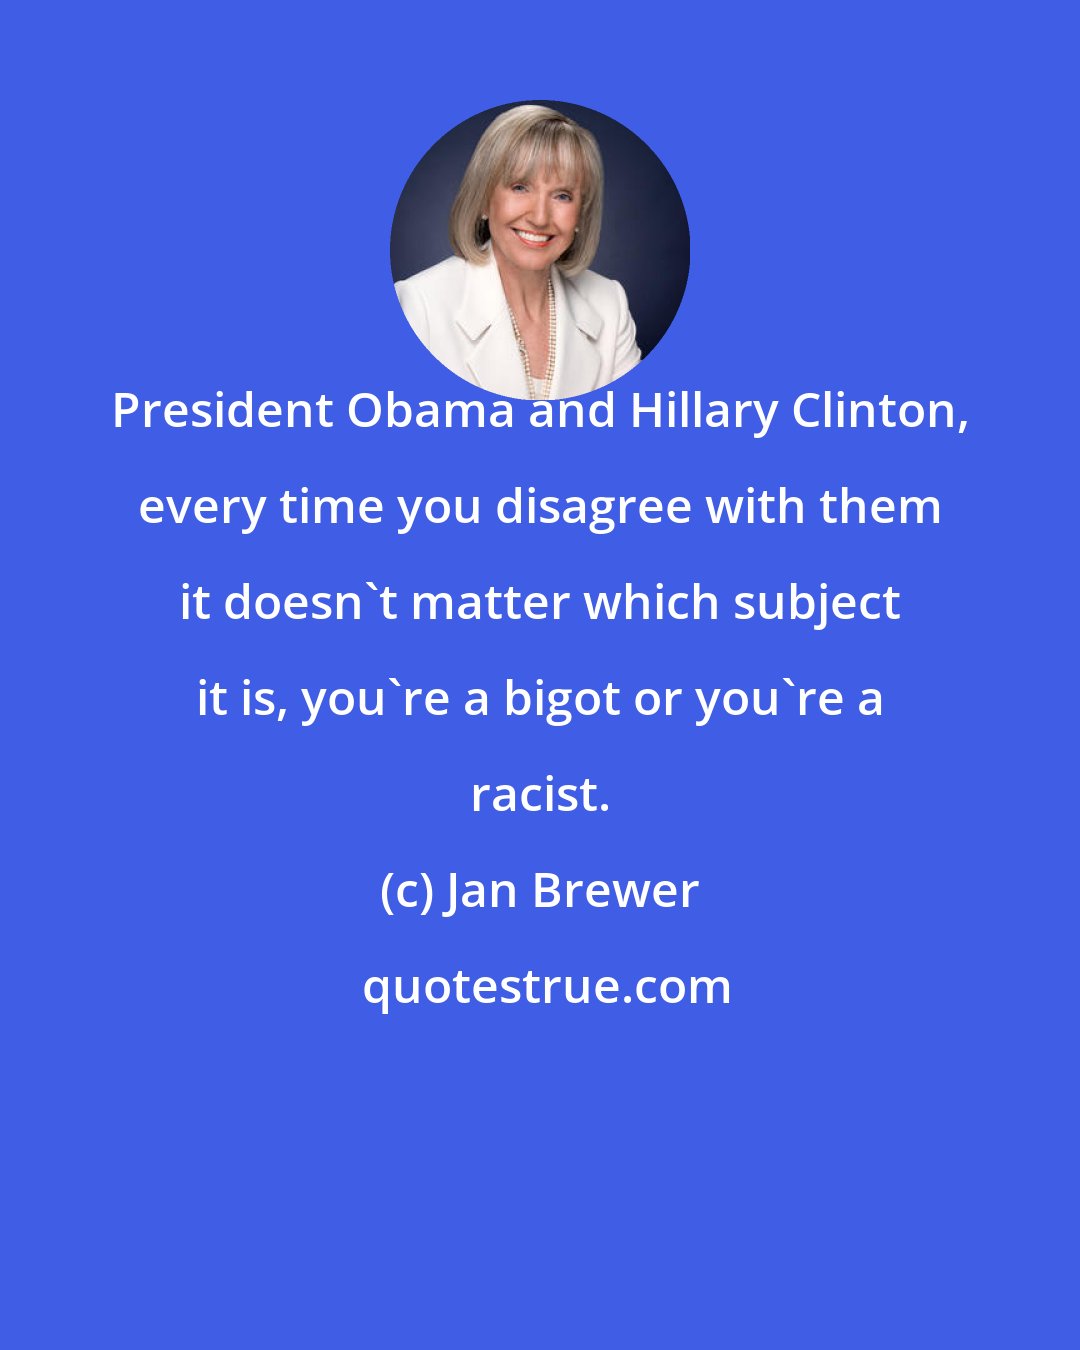 Jan Brewer: President Obama and Hillary Clinton, every time you disagree with them it doesn't matter which subject it is, you're a bigot or you're a racist.